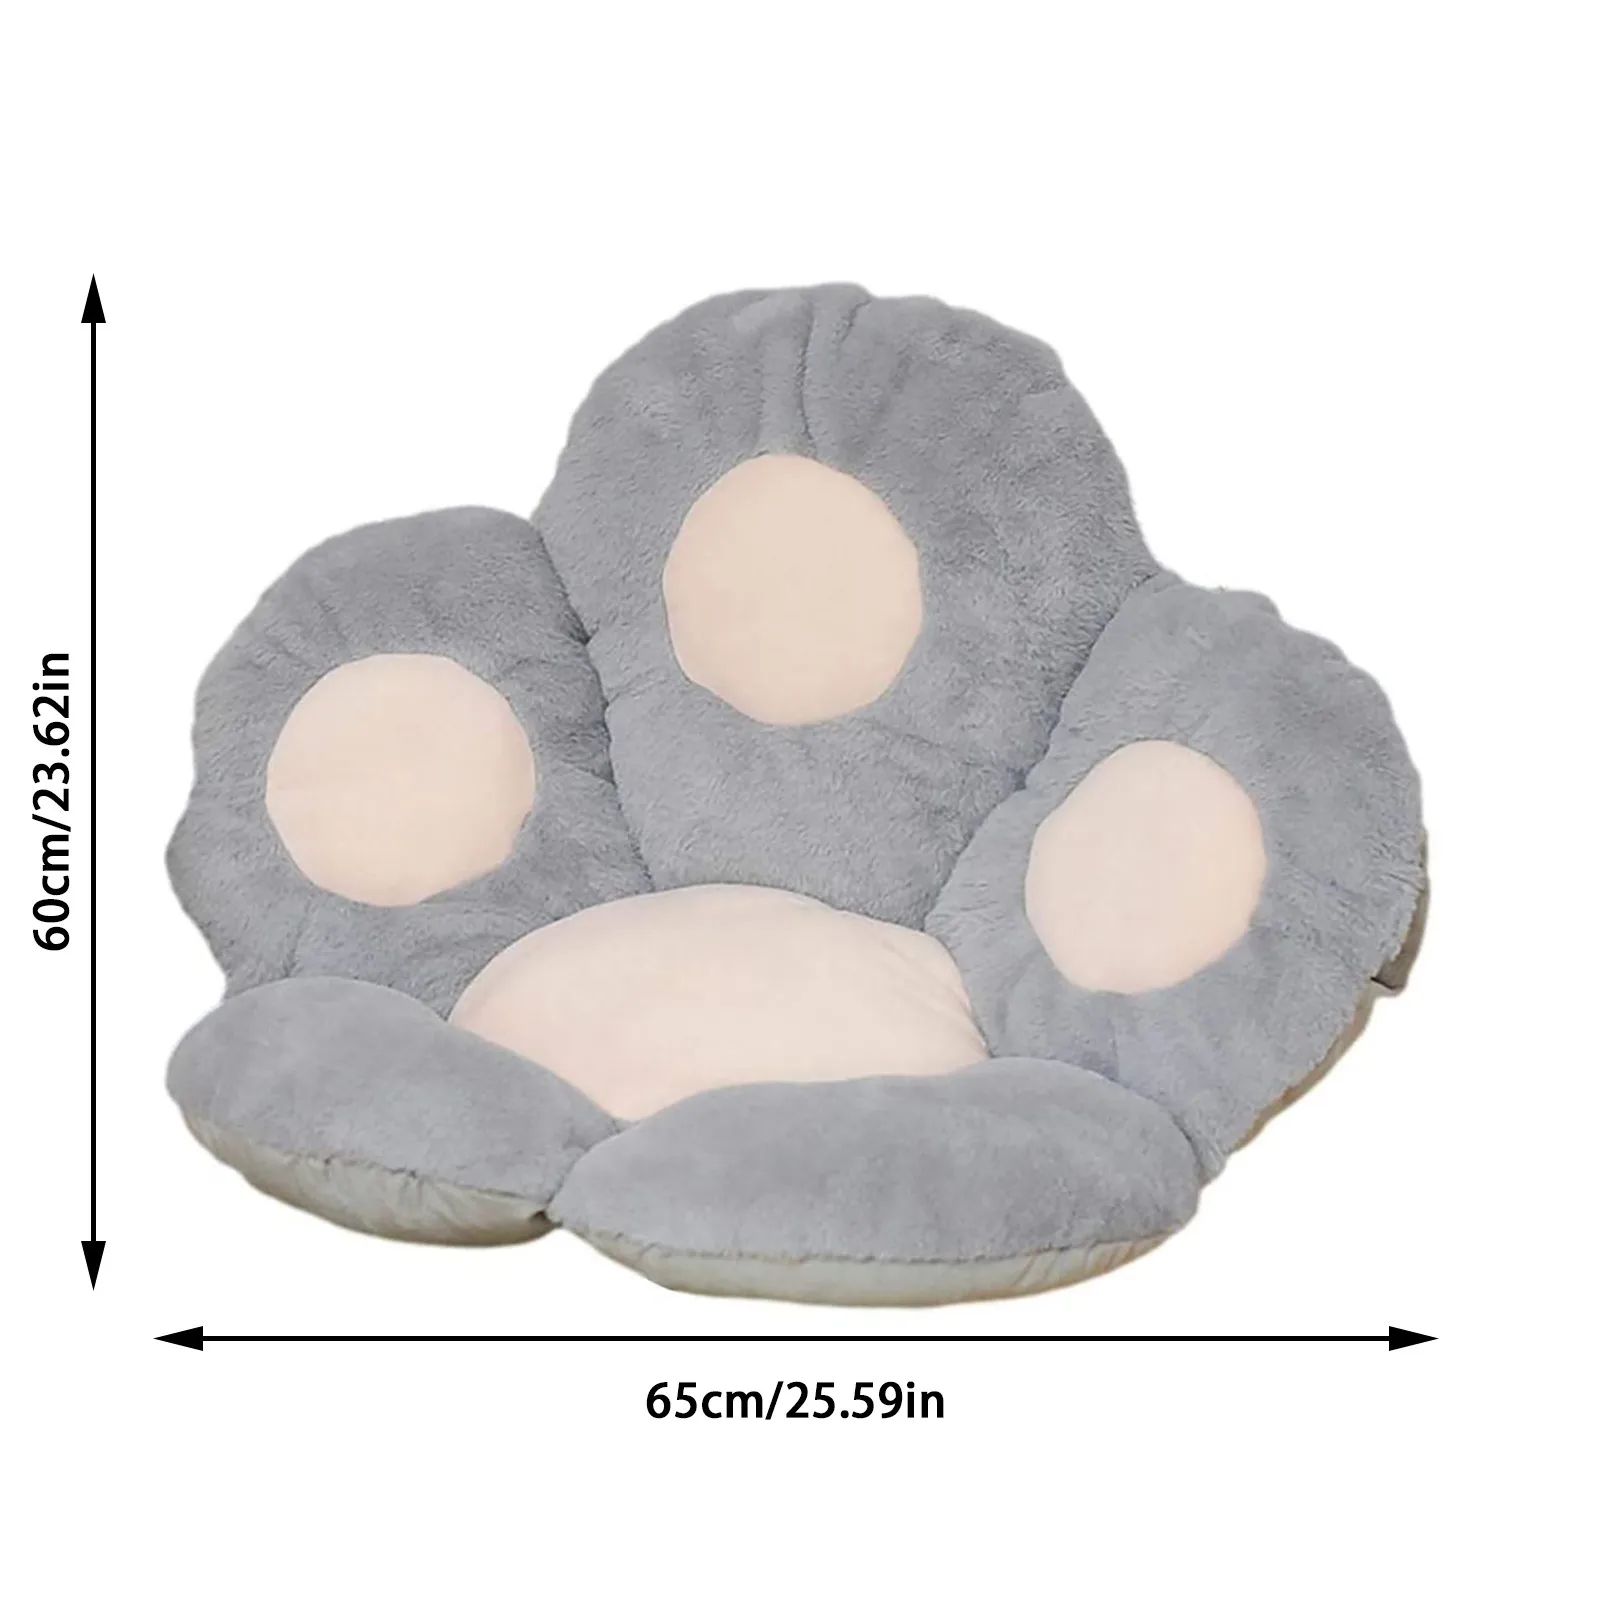 

Adorable Plush Stuffed Cat Paw Cushion Reversible Armchair Seat Cushion Home Office Soft Furry Cozy Chair Cushion Comfort Seat